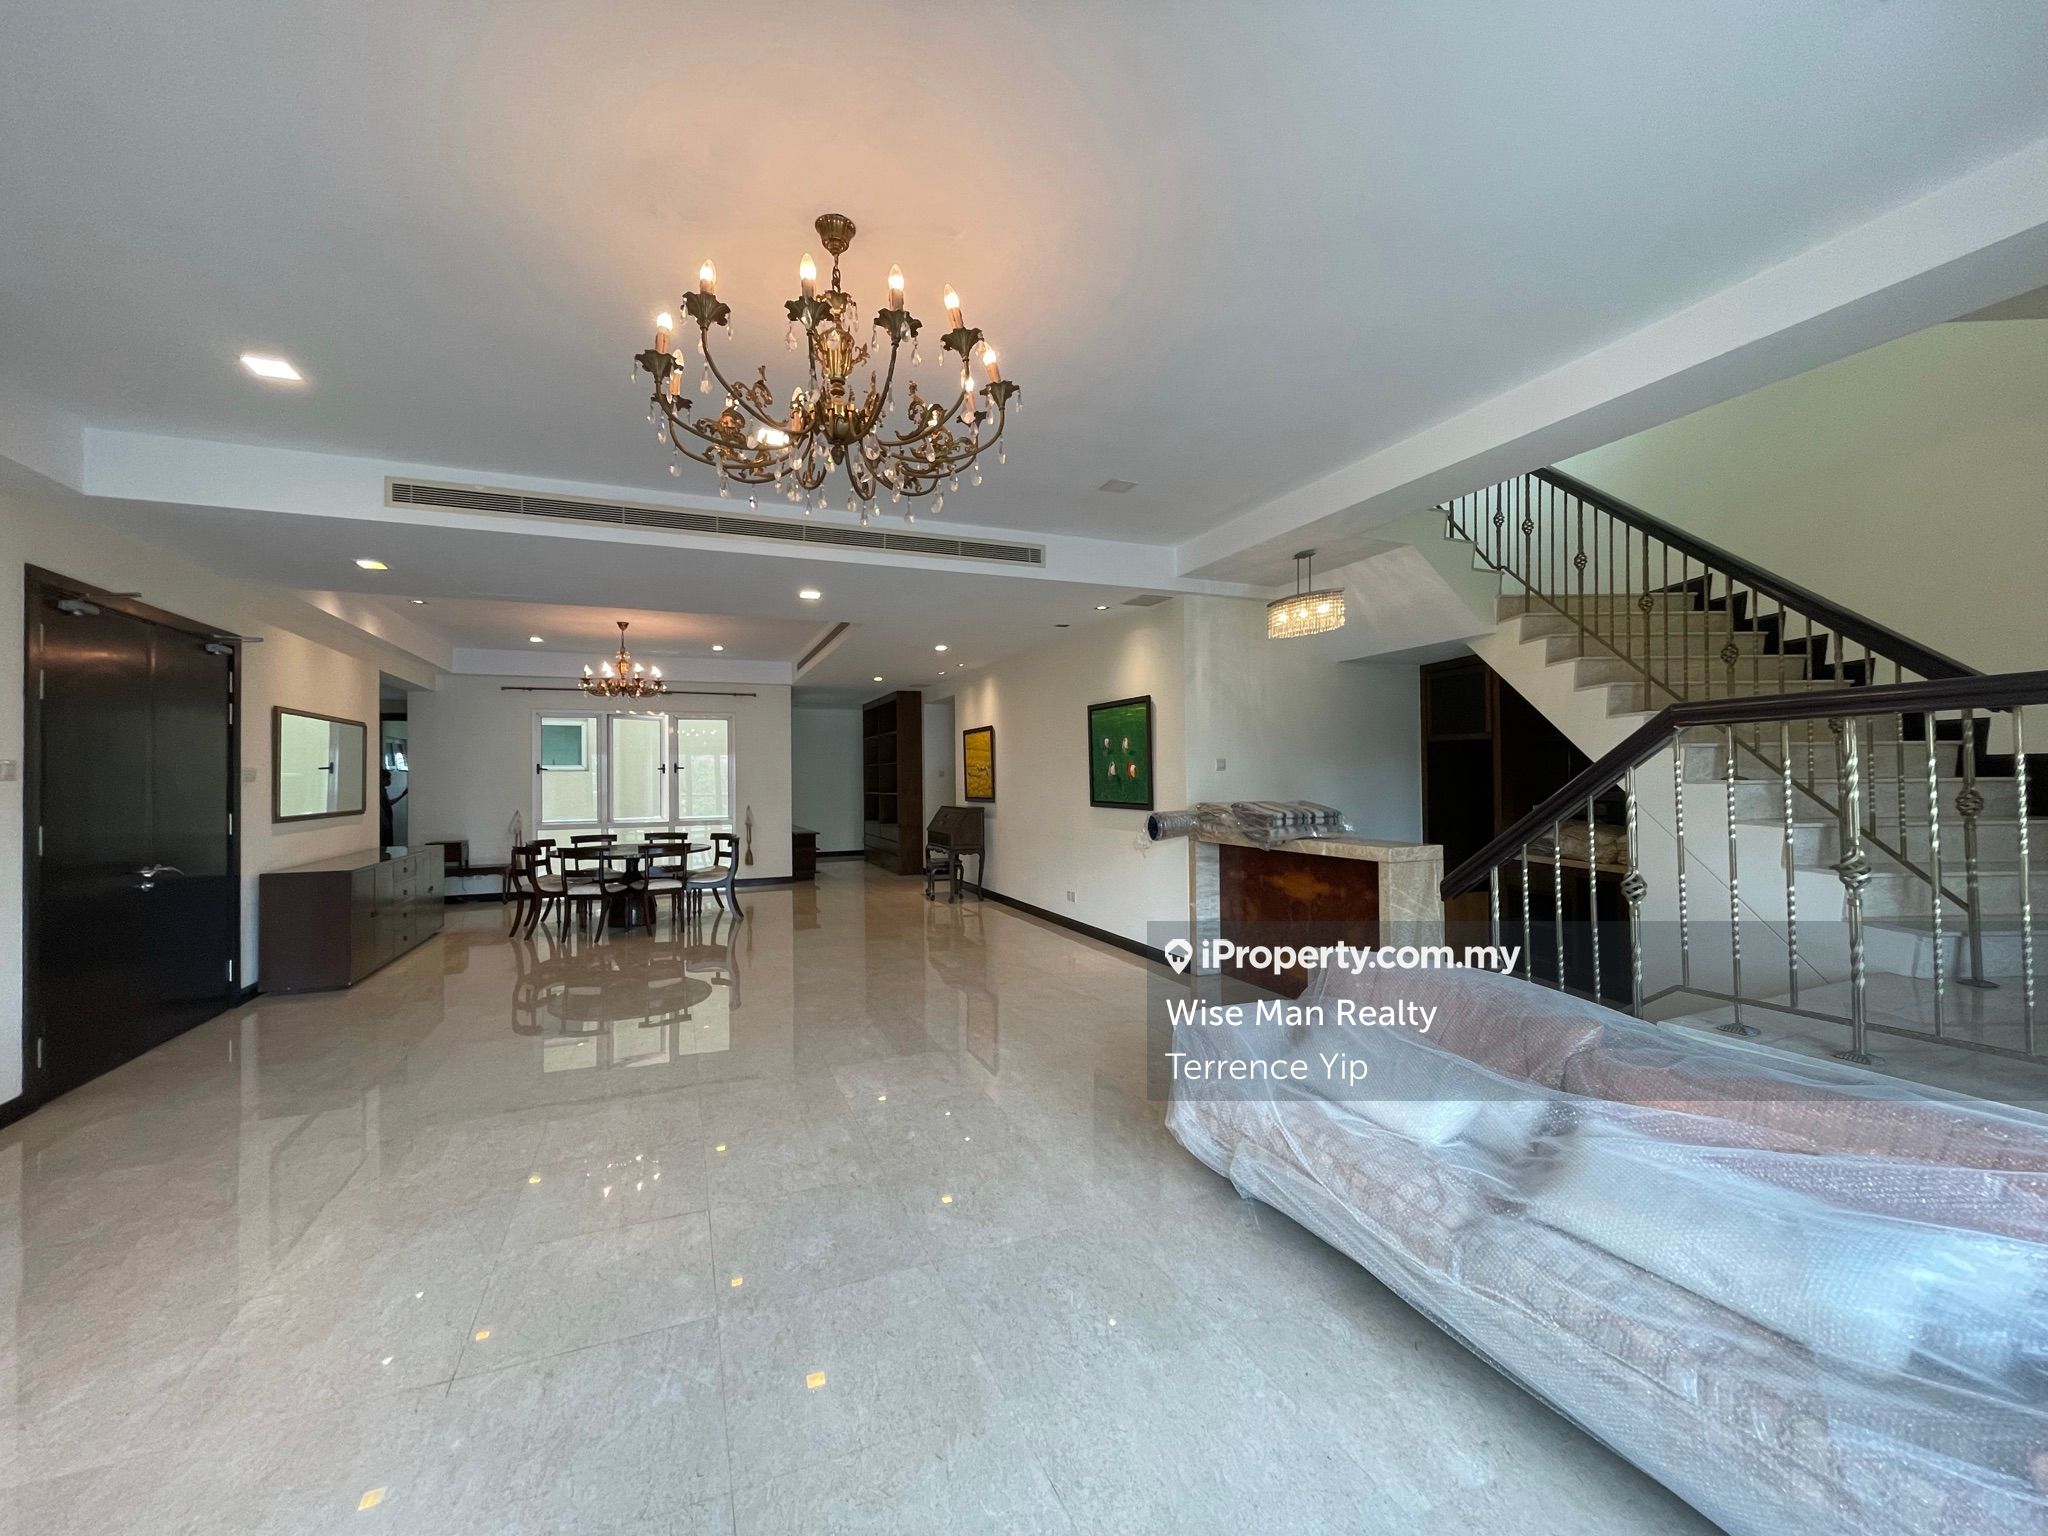 Bukit Tunku 8rooms duplex penthouse for sale at 3.68mil only